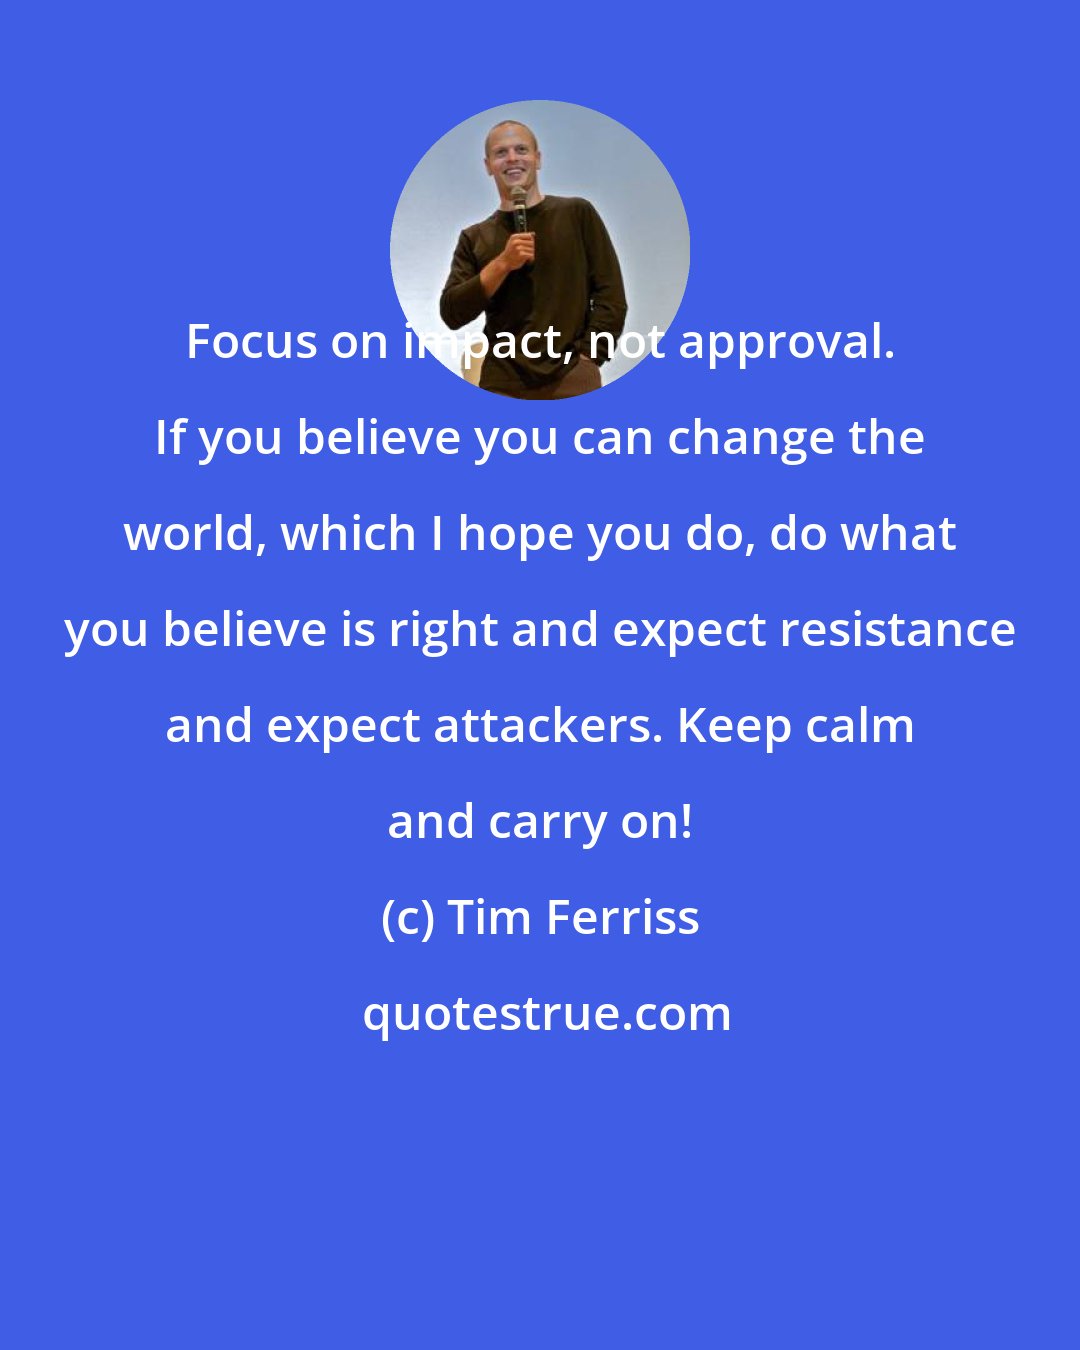 Tim Ferriss: Focus on impact, not approval. If you believe you can change the world, which I hope you do, do what you believe is right and expect resistance and expect attackers. Keep calm and carry on!